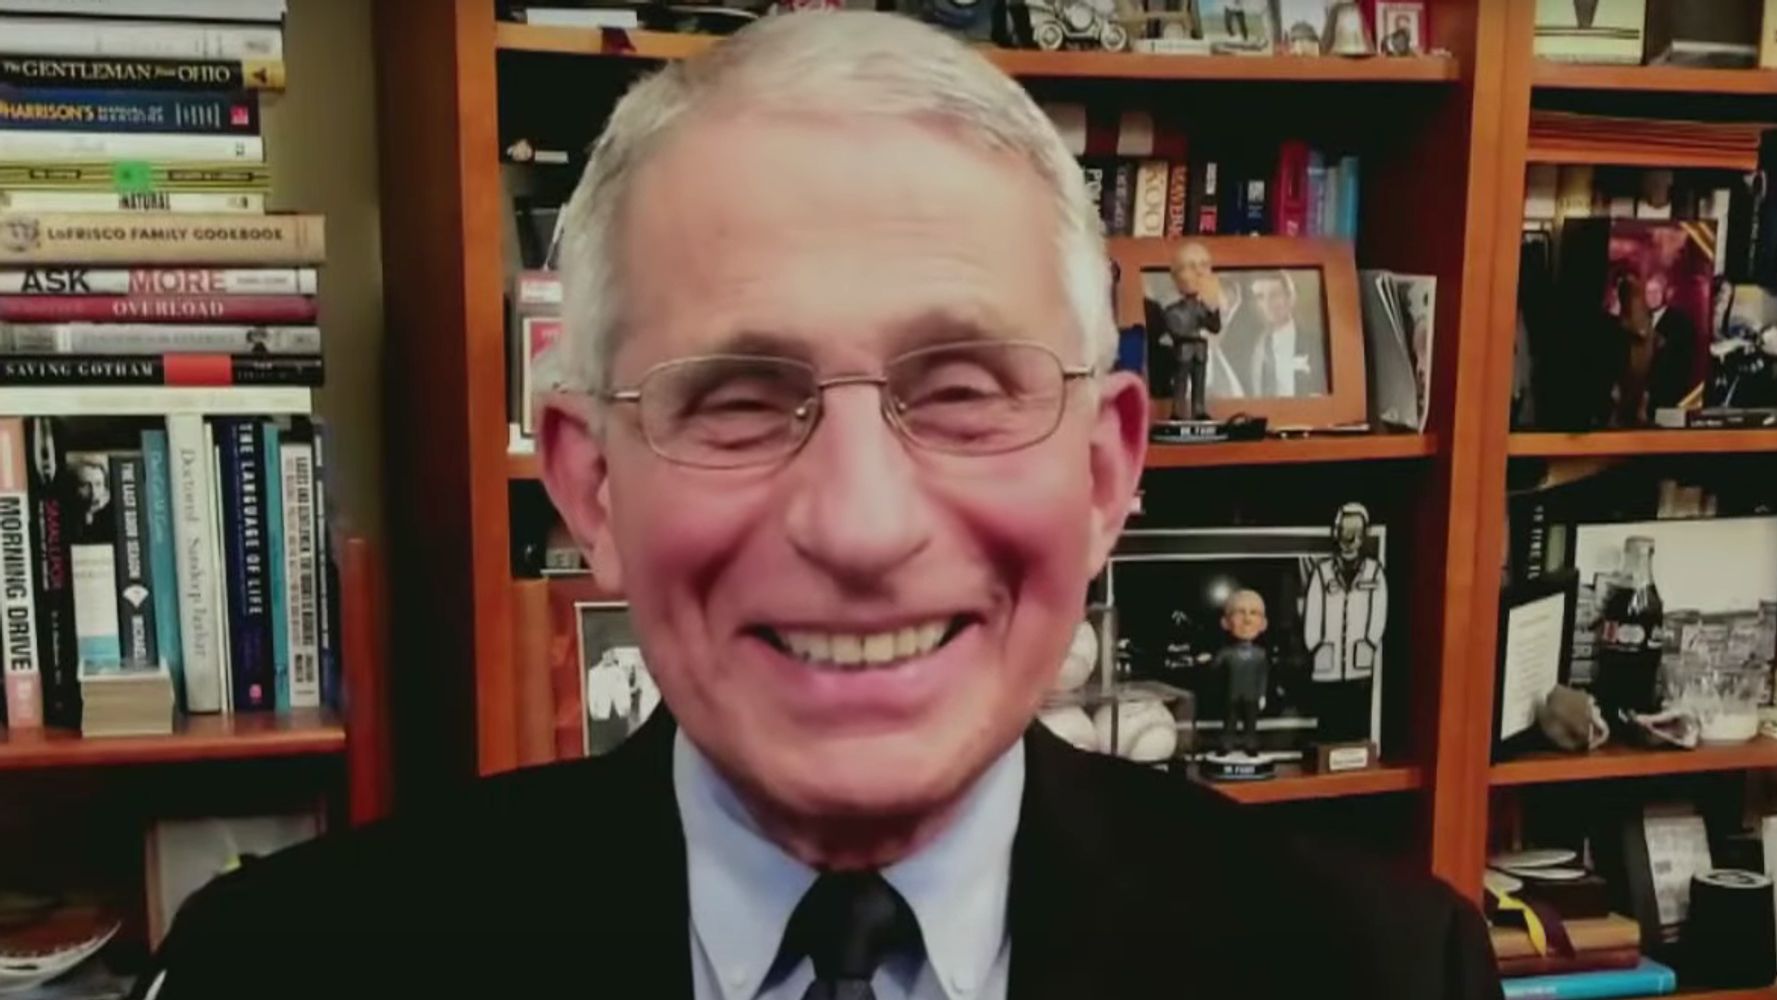 Fauci has a one-word answer to the ‘What’s changed’ question around January 20